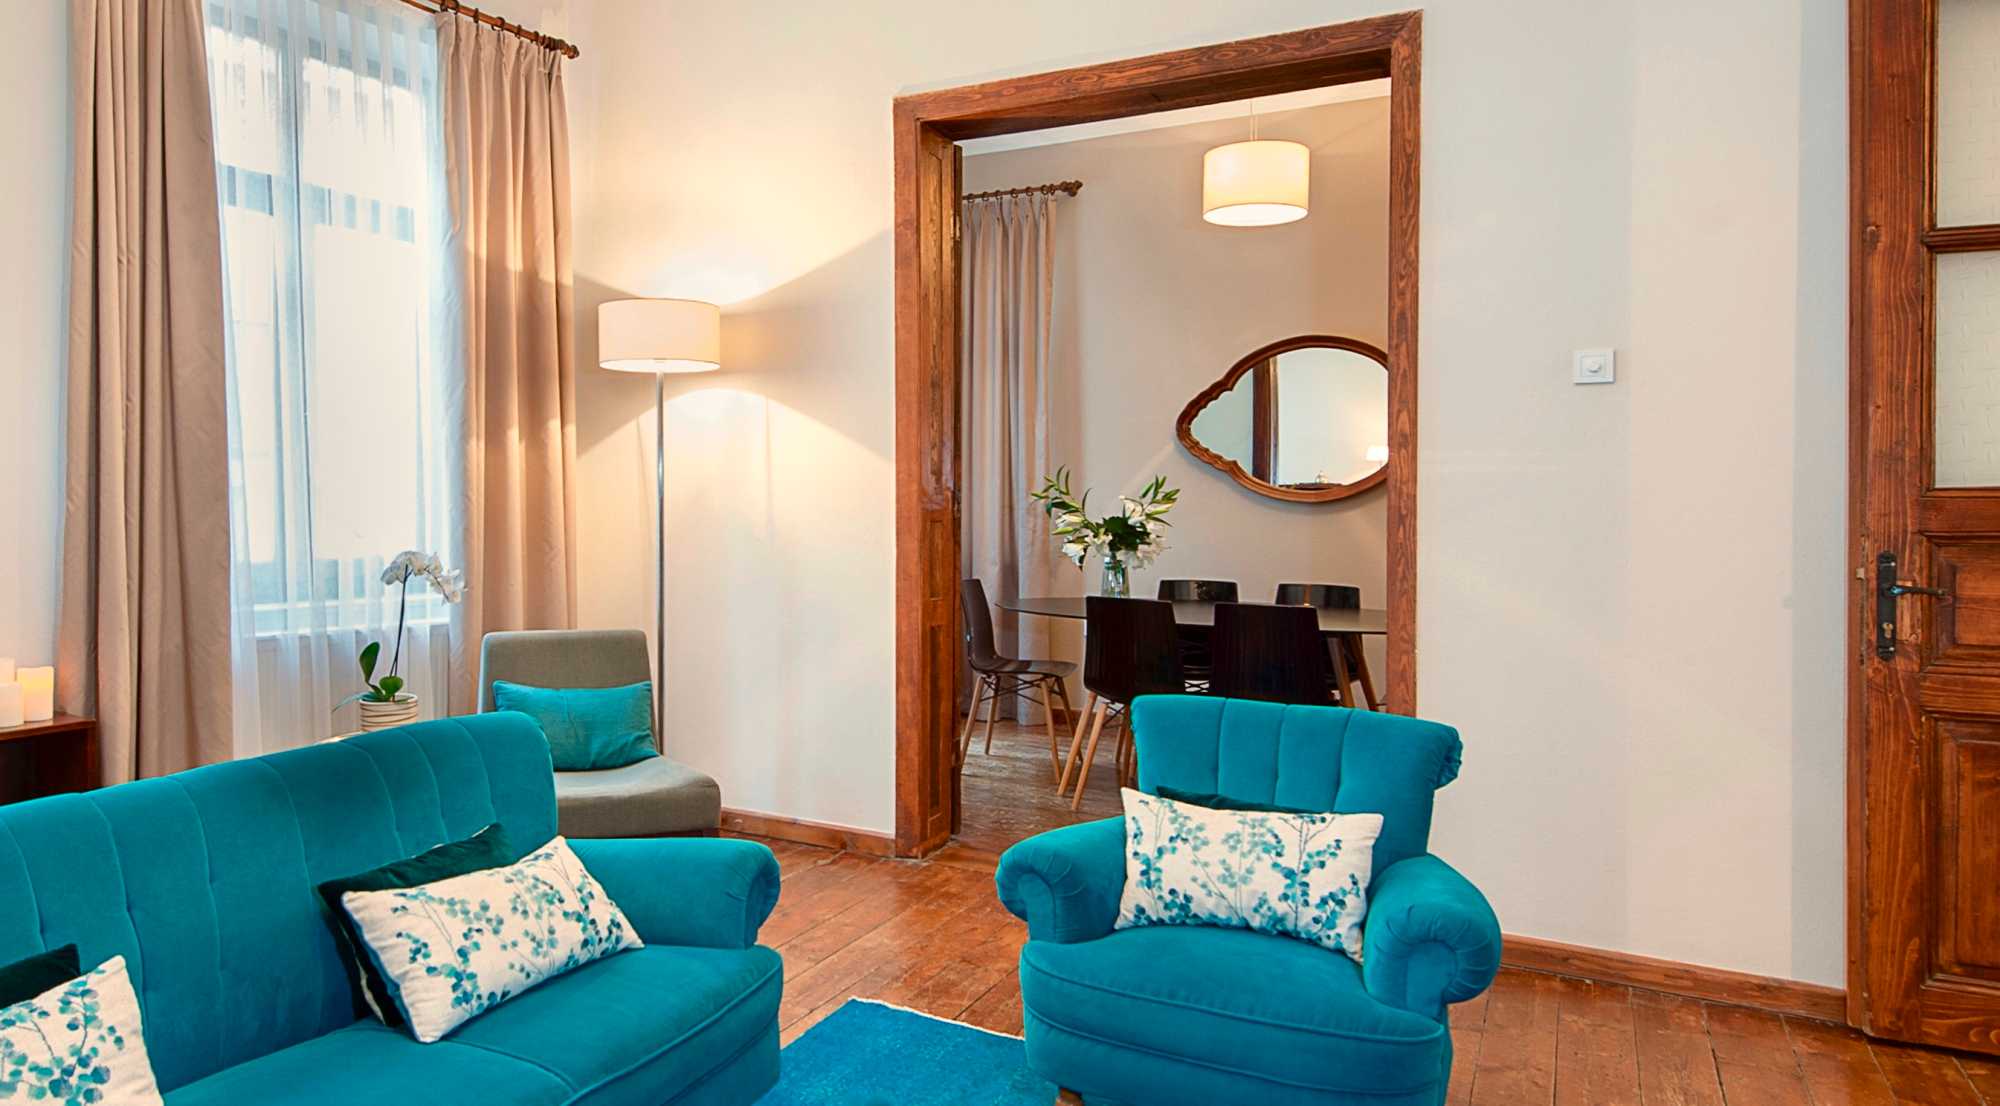 Newly renovated and furnished three bedroom design apartment for residential rent in Galata, Beyoglu, Istanbul.